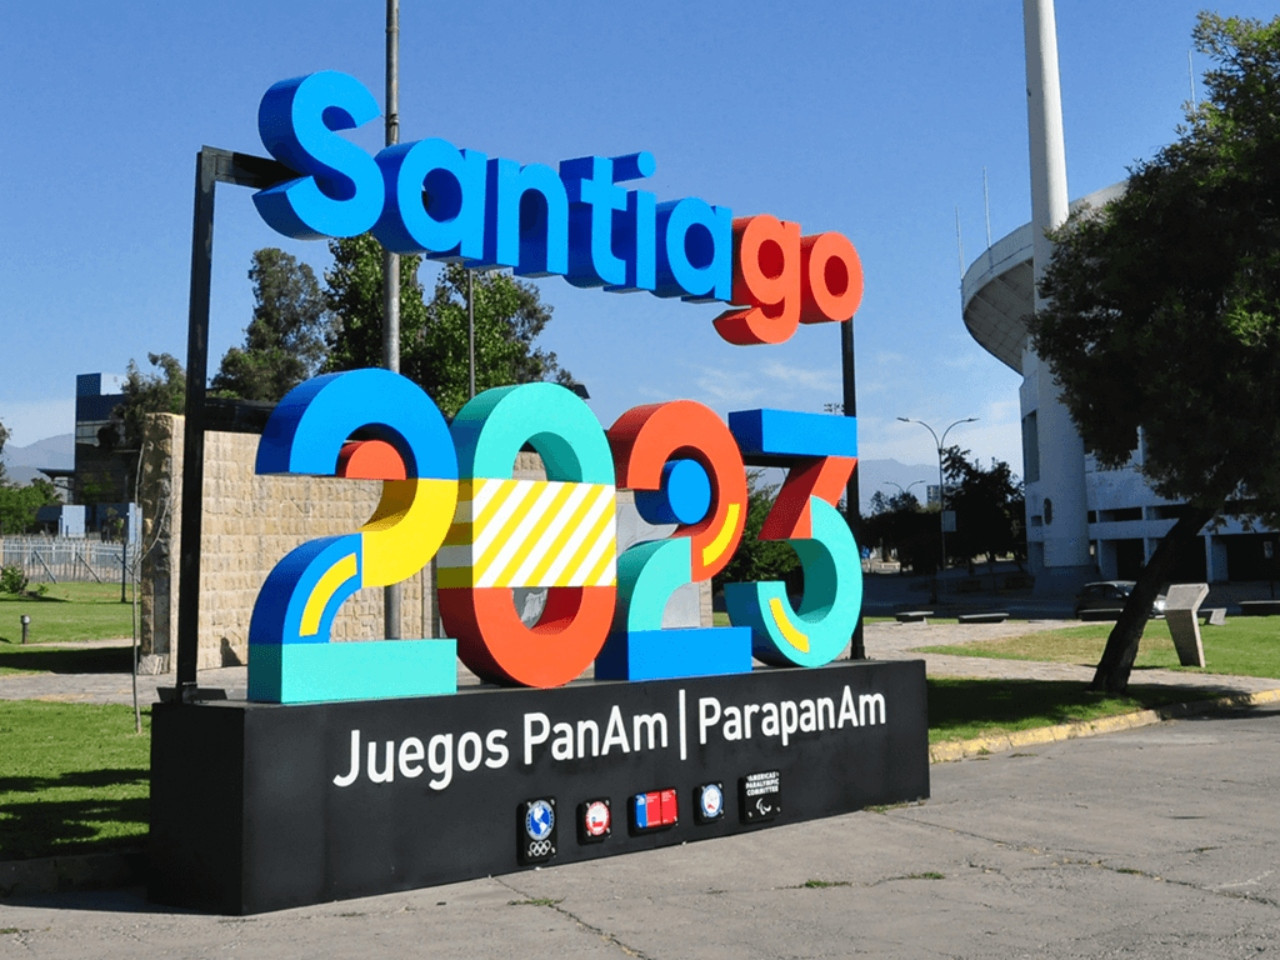 Santiago 2023 will have 41 nations competing in 39 sports ©Santiago 2023